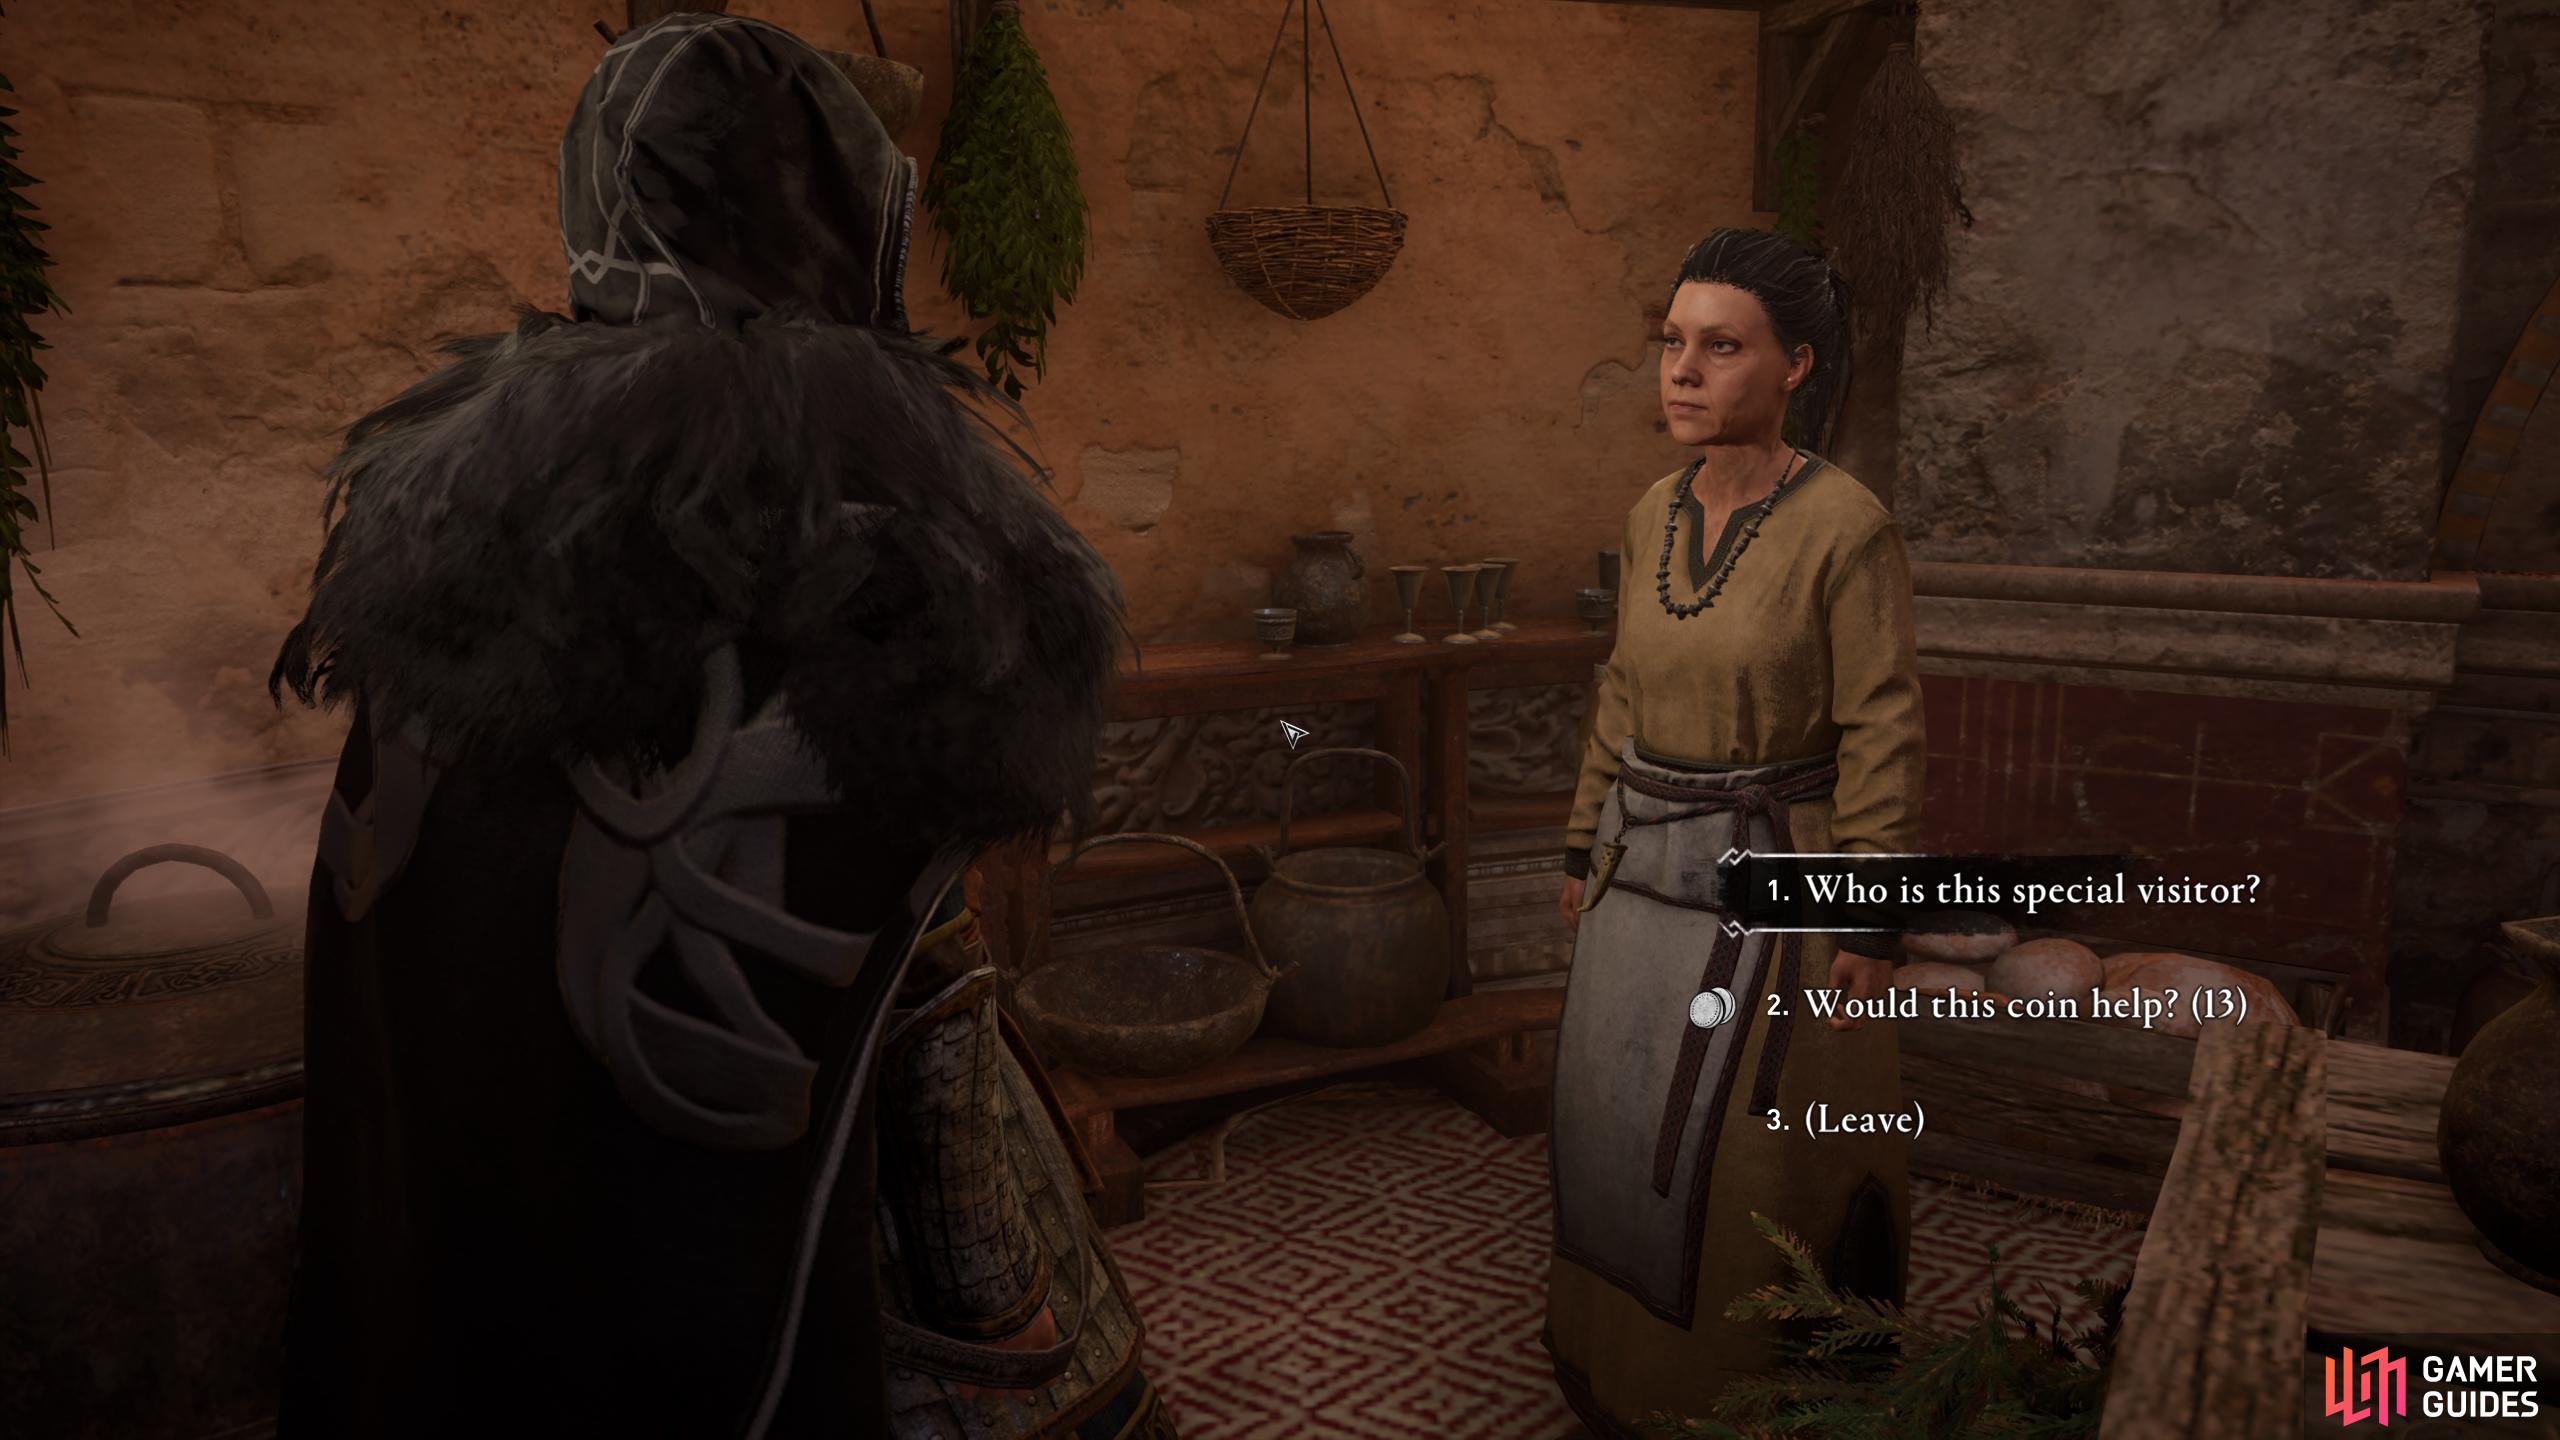 You can bribe the barwoman to learn of an alternative entrance to the brothel if your charisma is lower than 2.